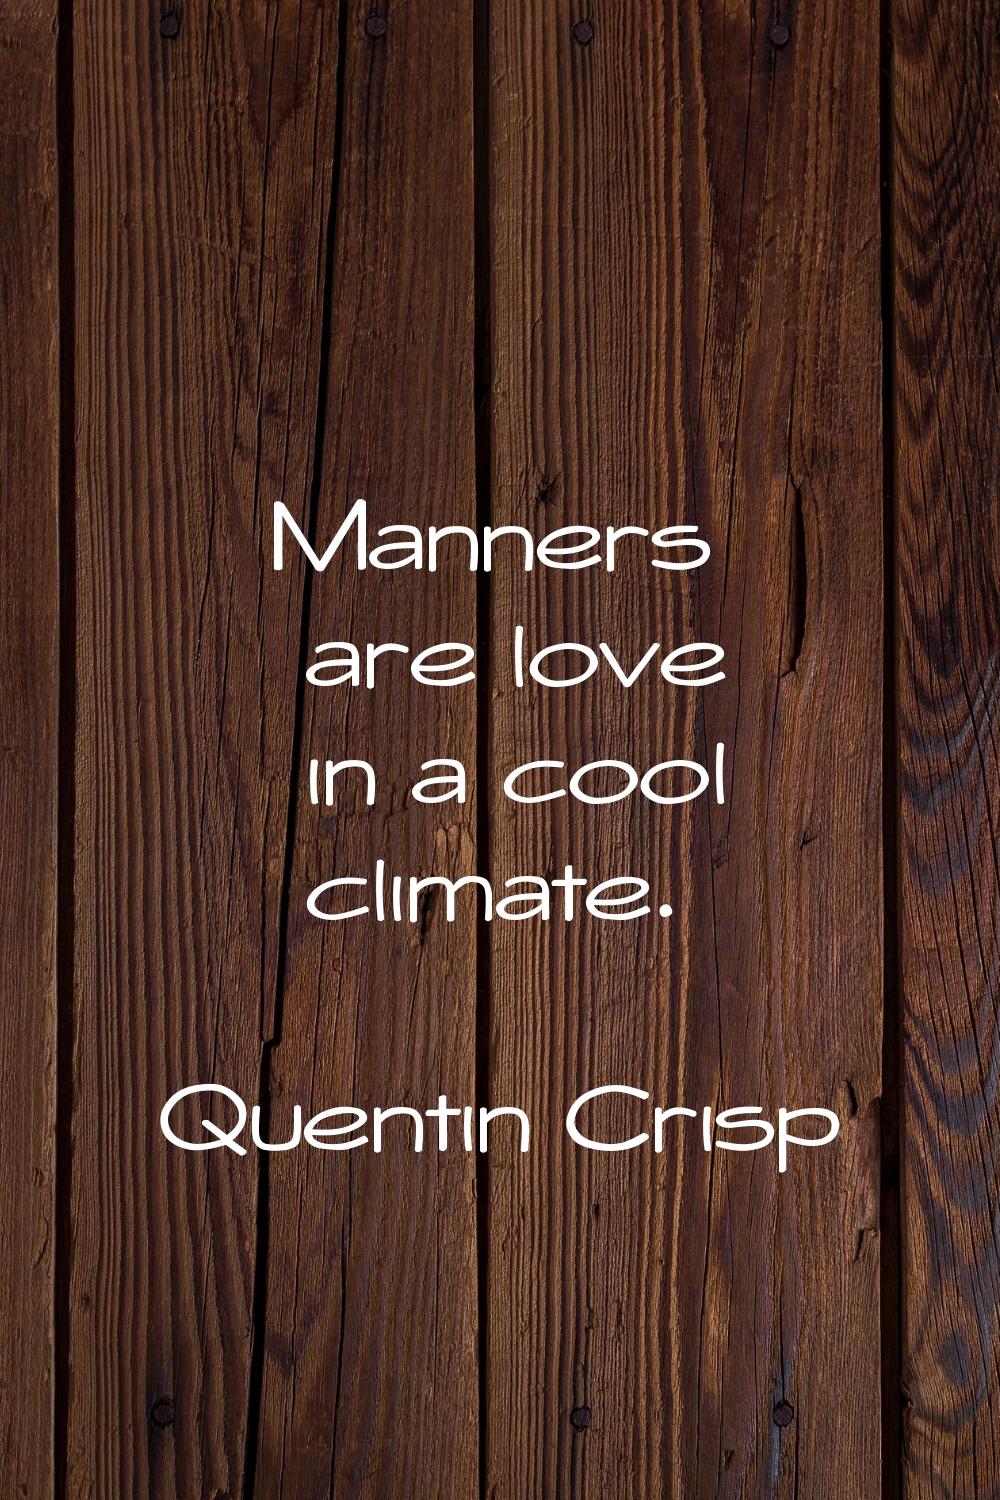 Manners are love in a cool climate.